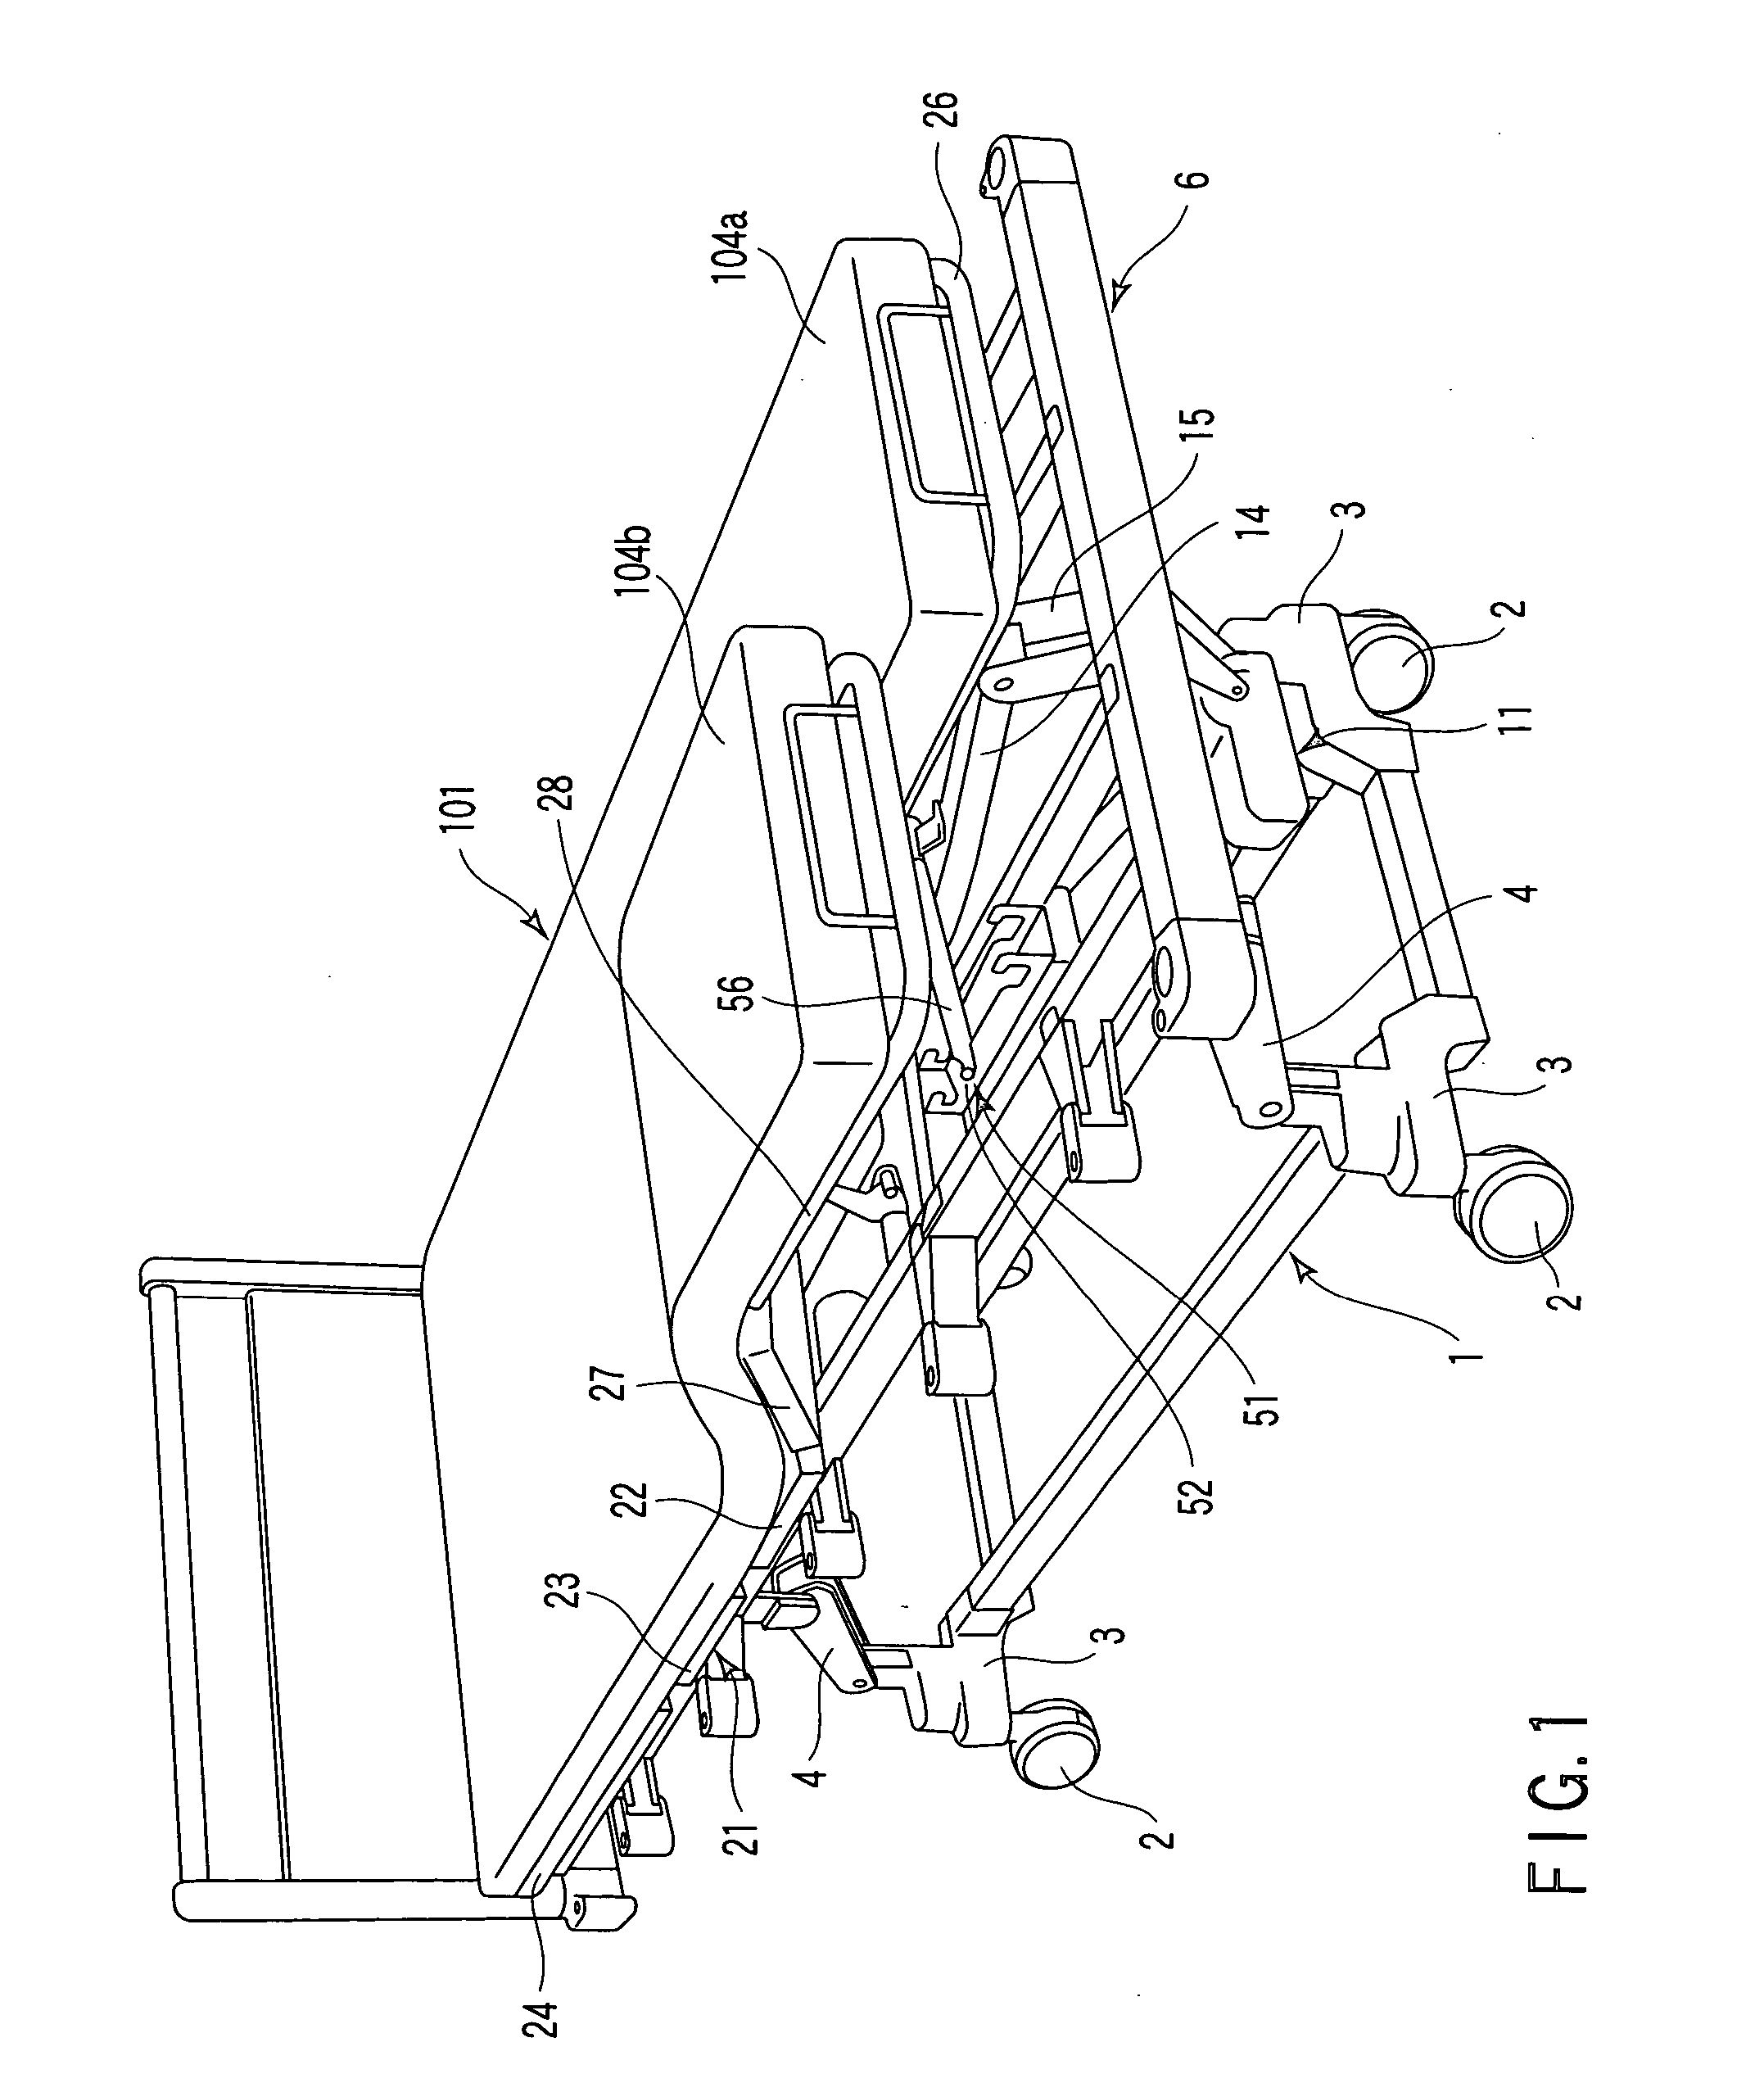 Rising-type bed apparatus and mattress